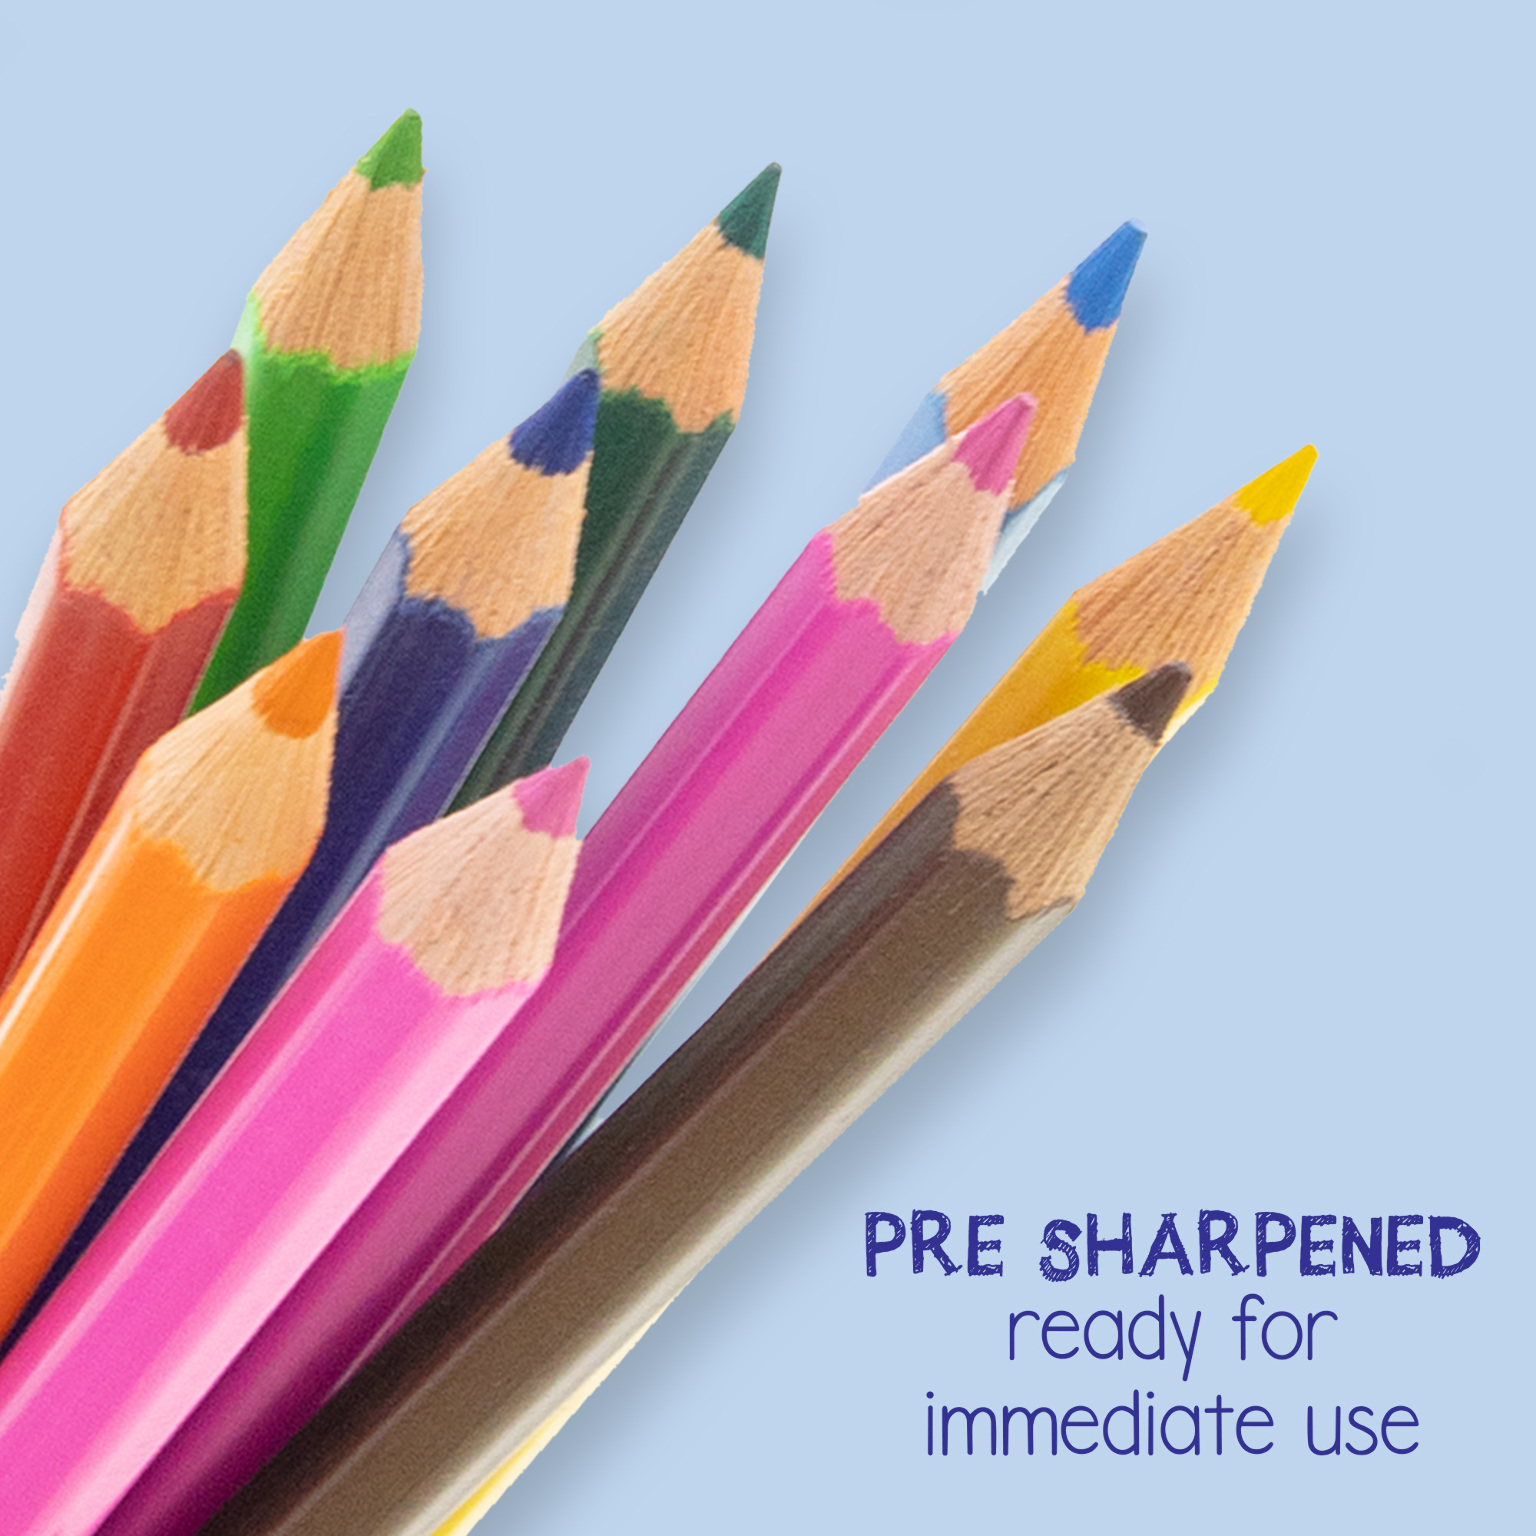 Wholesale Colored Pencils, Pre-Sharpened, 18 Pack - DollarDays